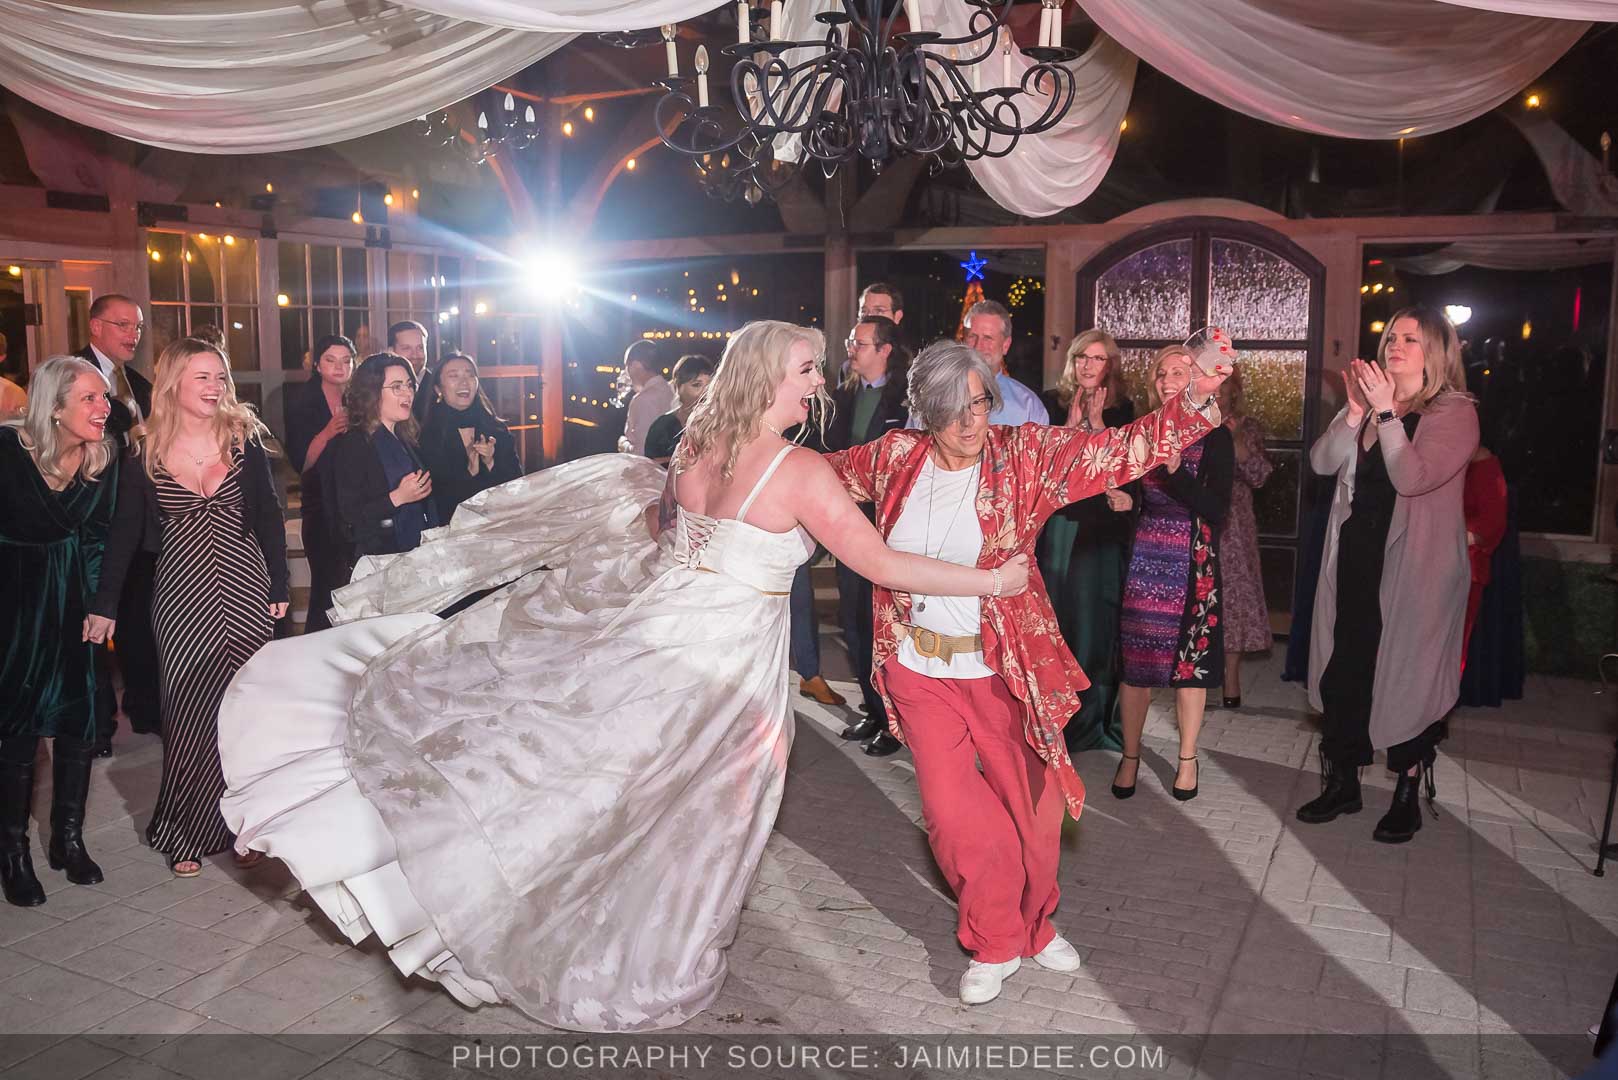 Rocky's Lake Estate Wedding Venue - reception - wedding guest dancing inside pavilion with ceiling drapes - bride twirling in her dress with guest